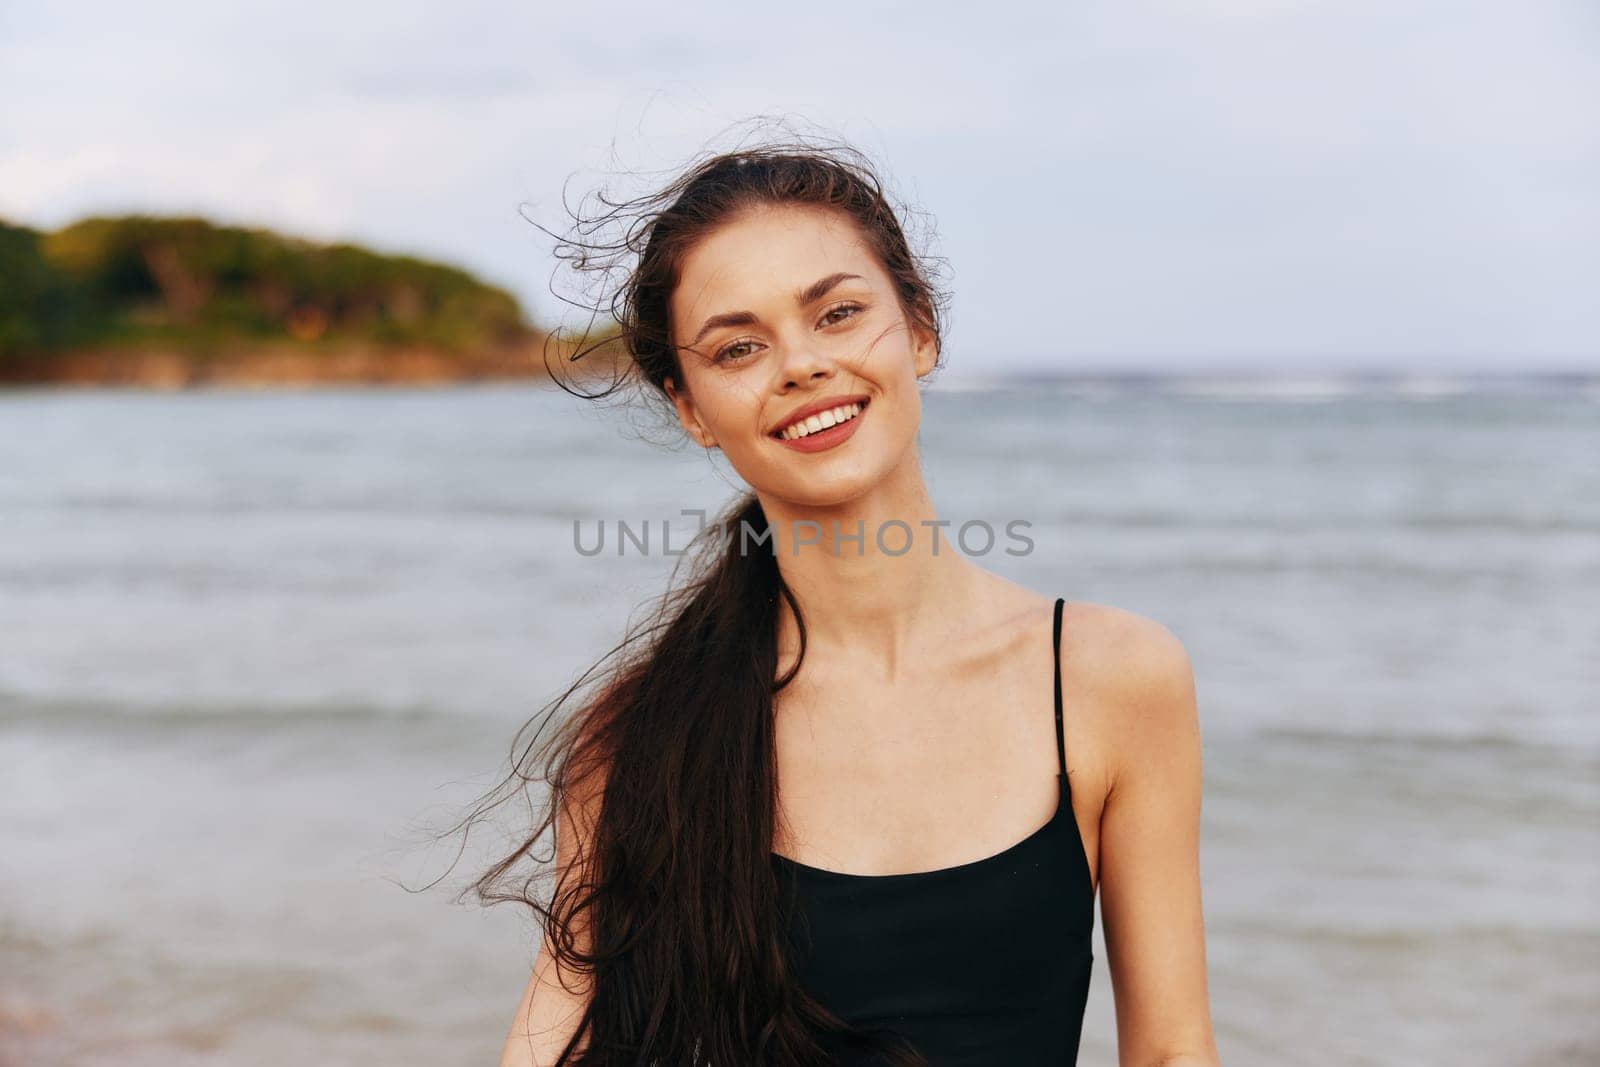 nature woman summer person happiness lifestyle coast ocean travel beautiful sea beach sand sunlight smile vacation free sunset outdoor adult water